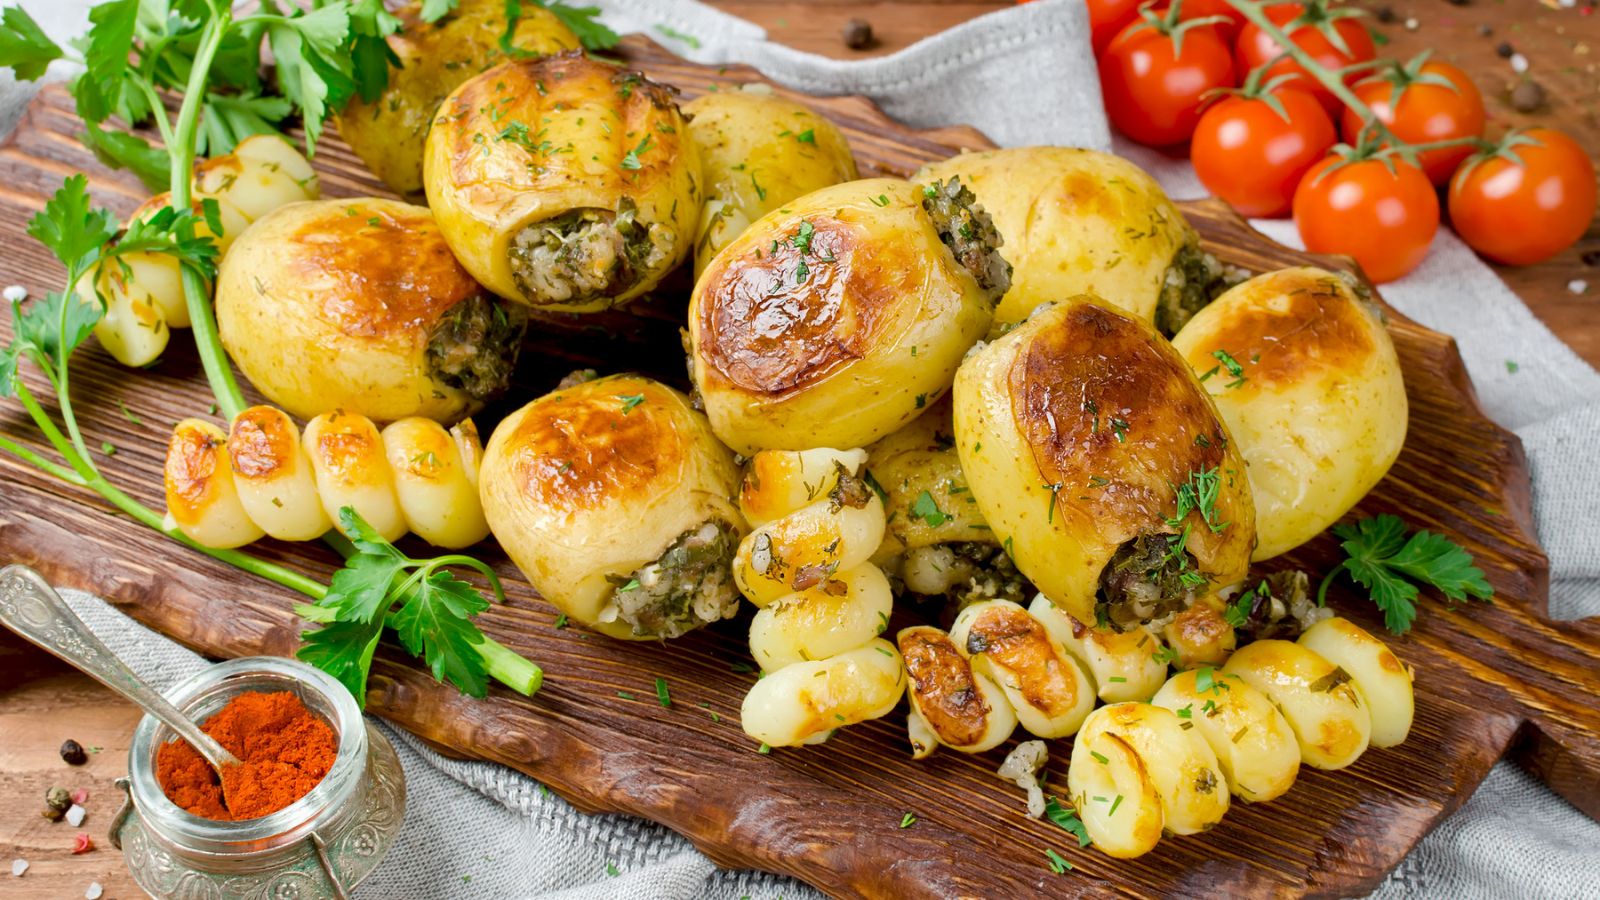 22 Easy Potato Recipes for Dinner That You’ll Eat Right Up